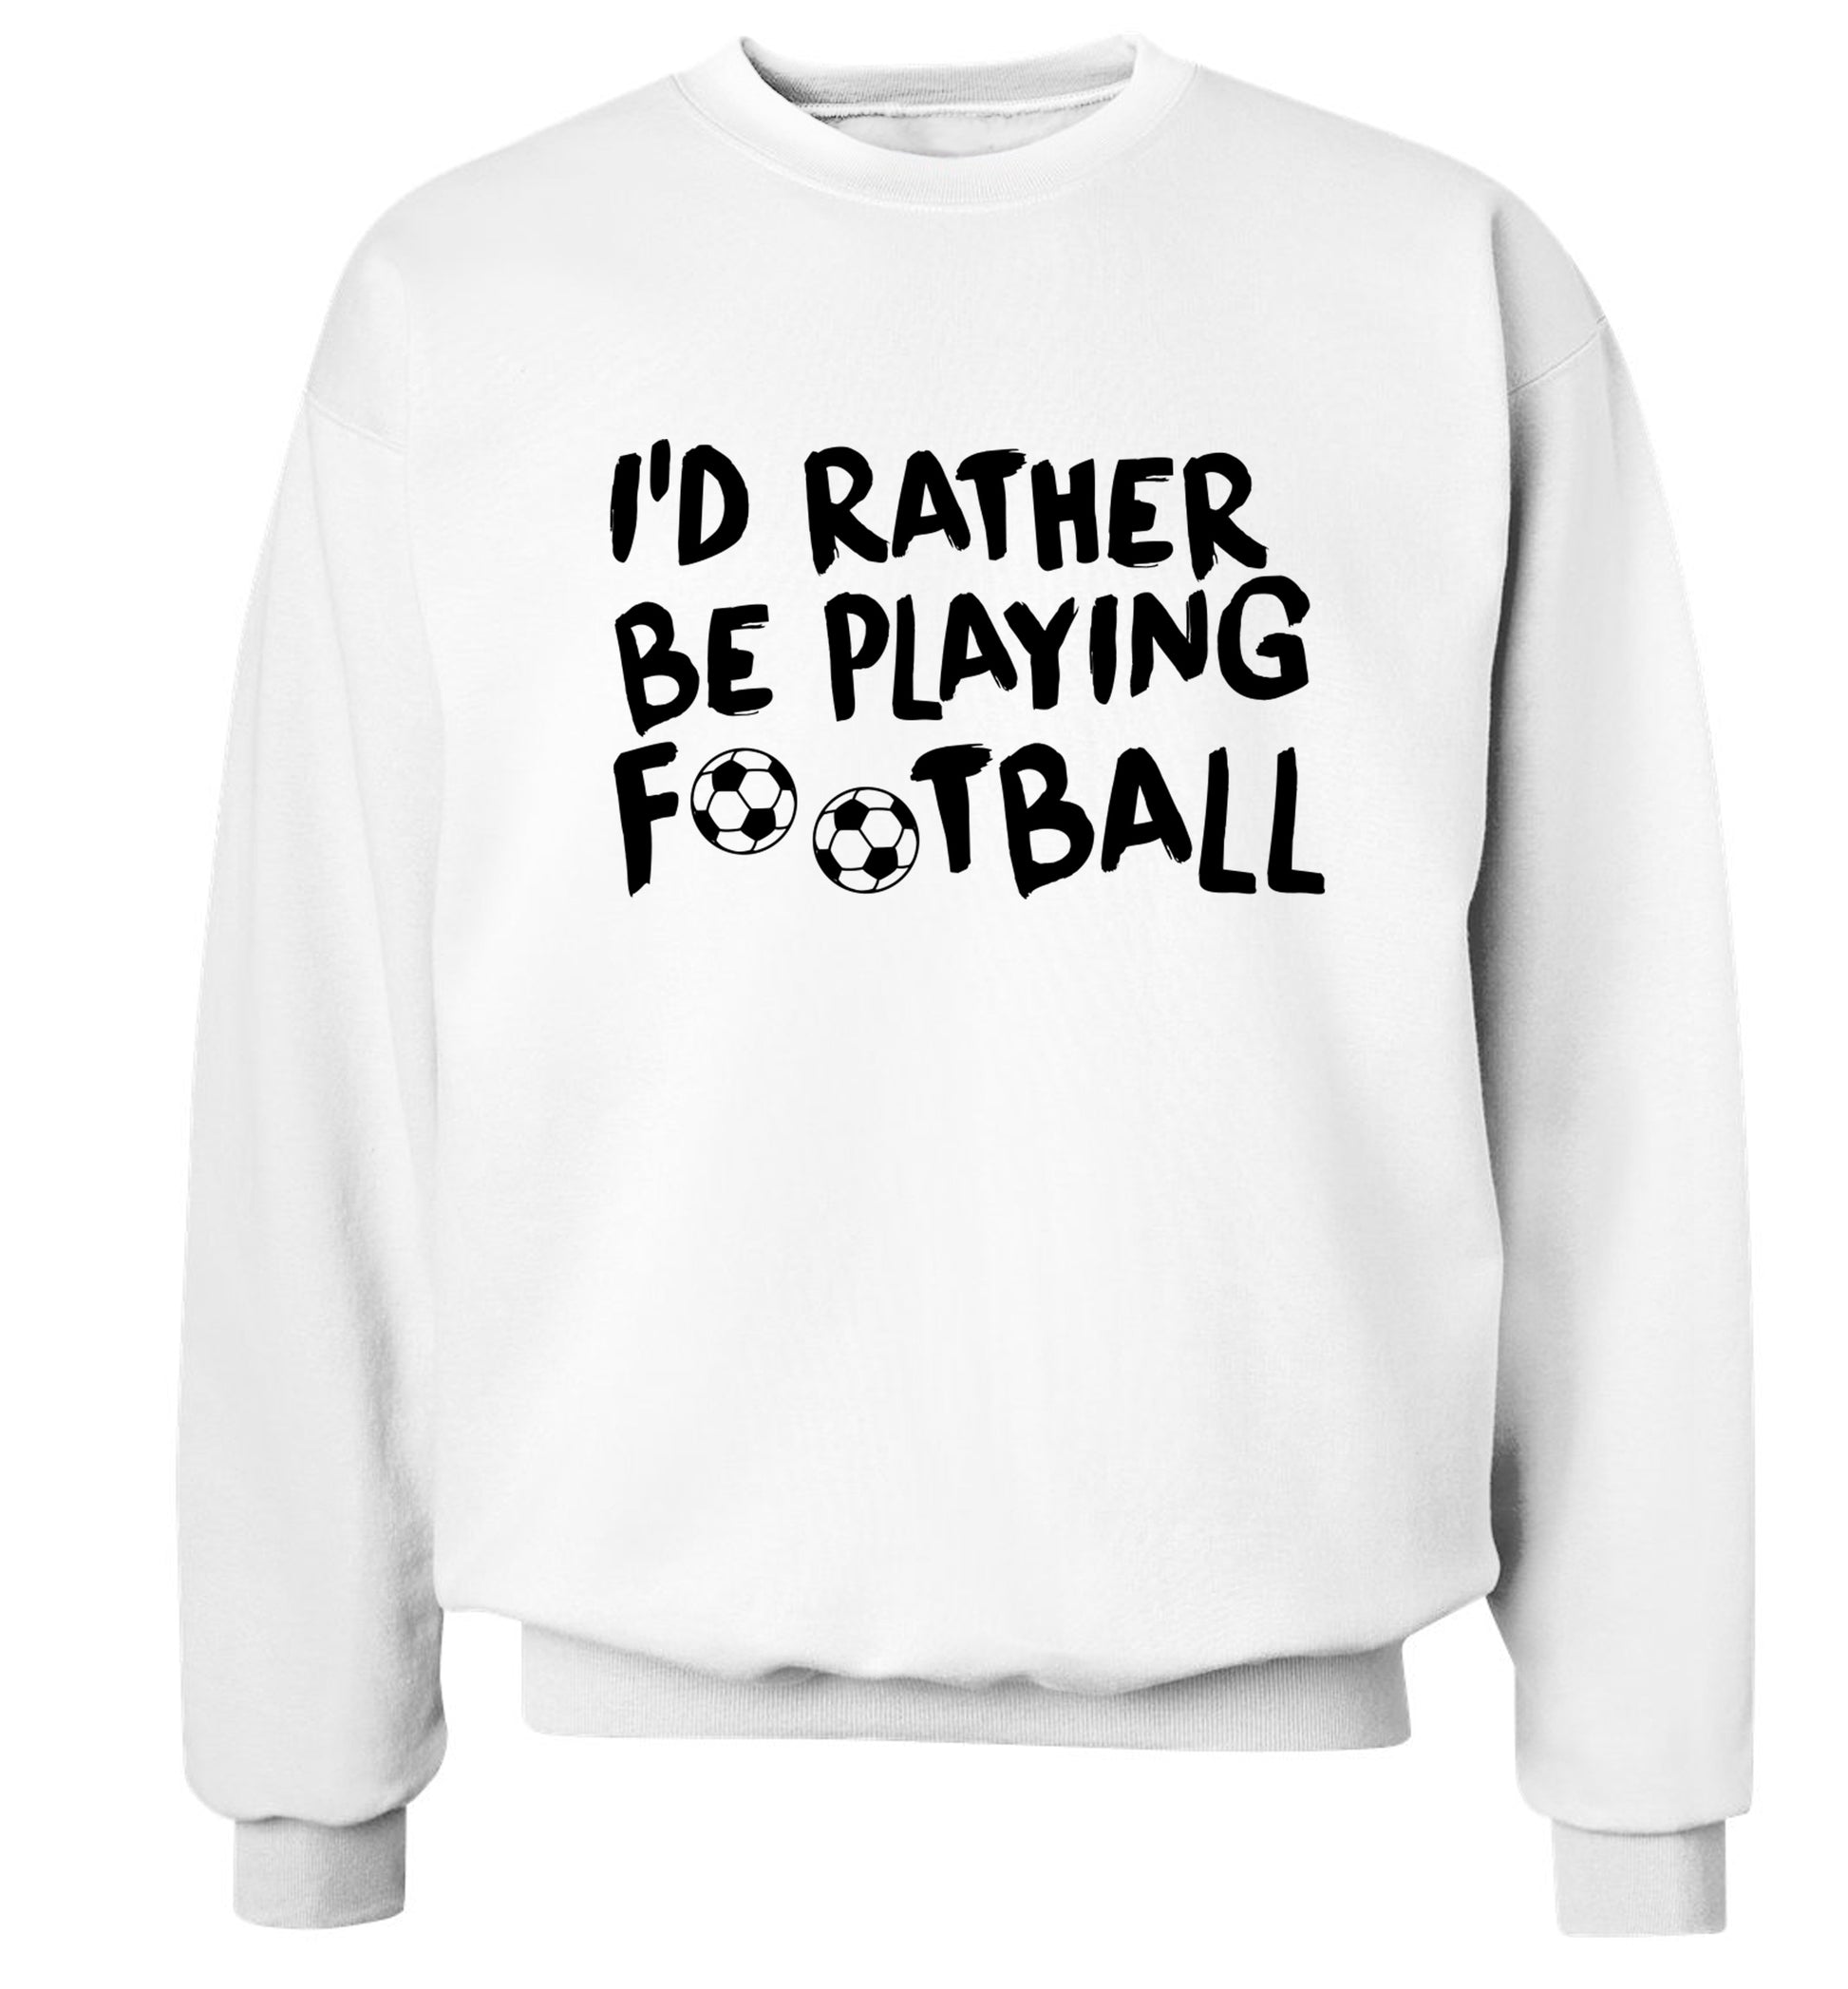 I'd rather be playing football Adult's unisexwhite Sweater 2XL